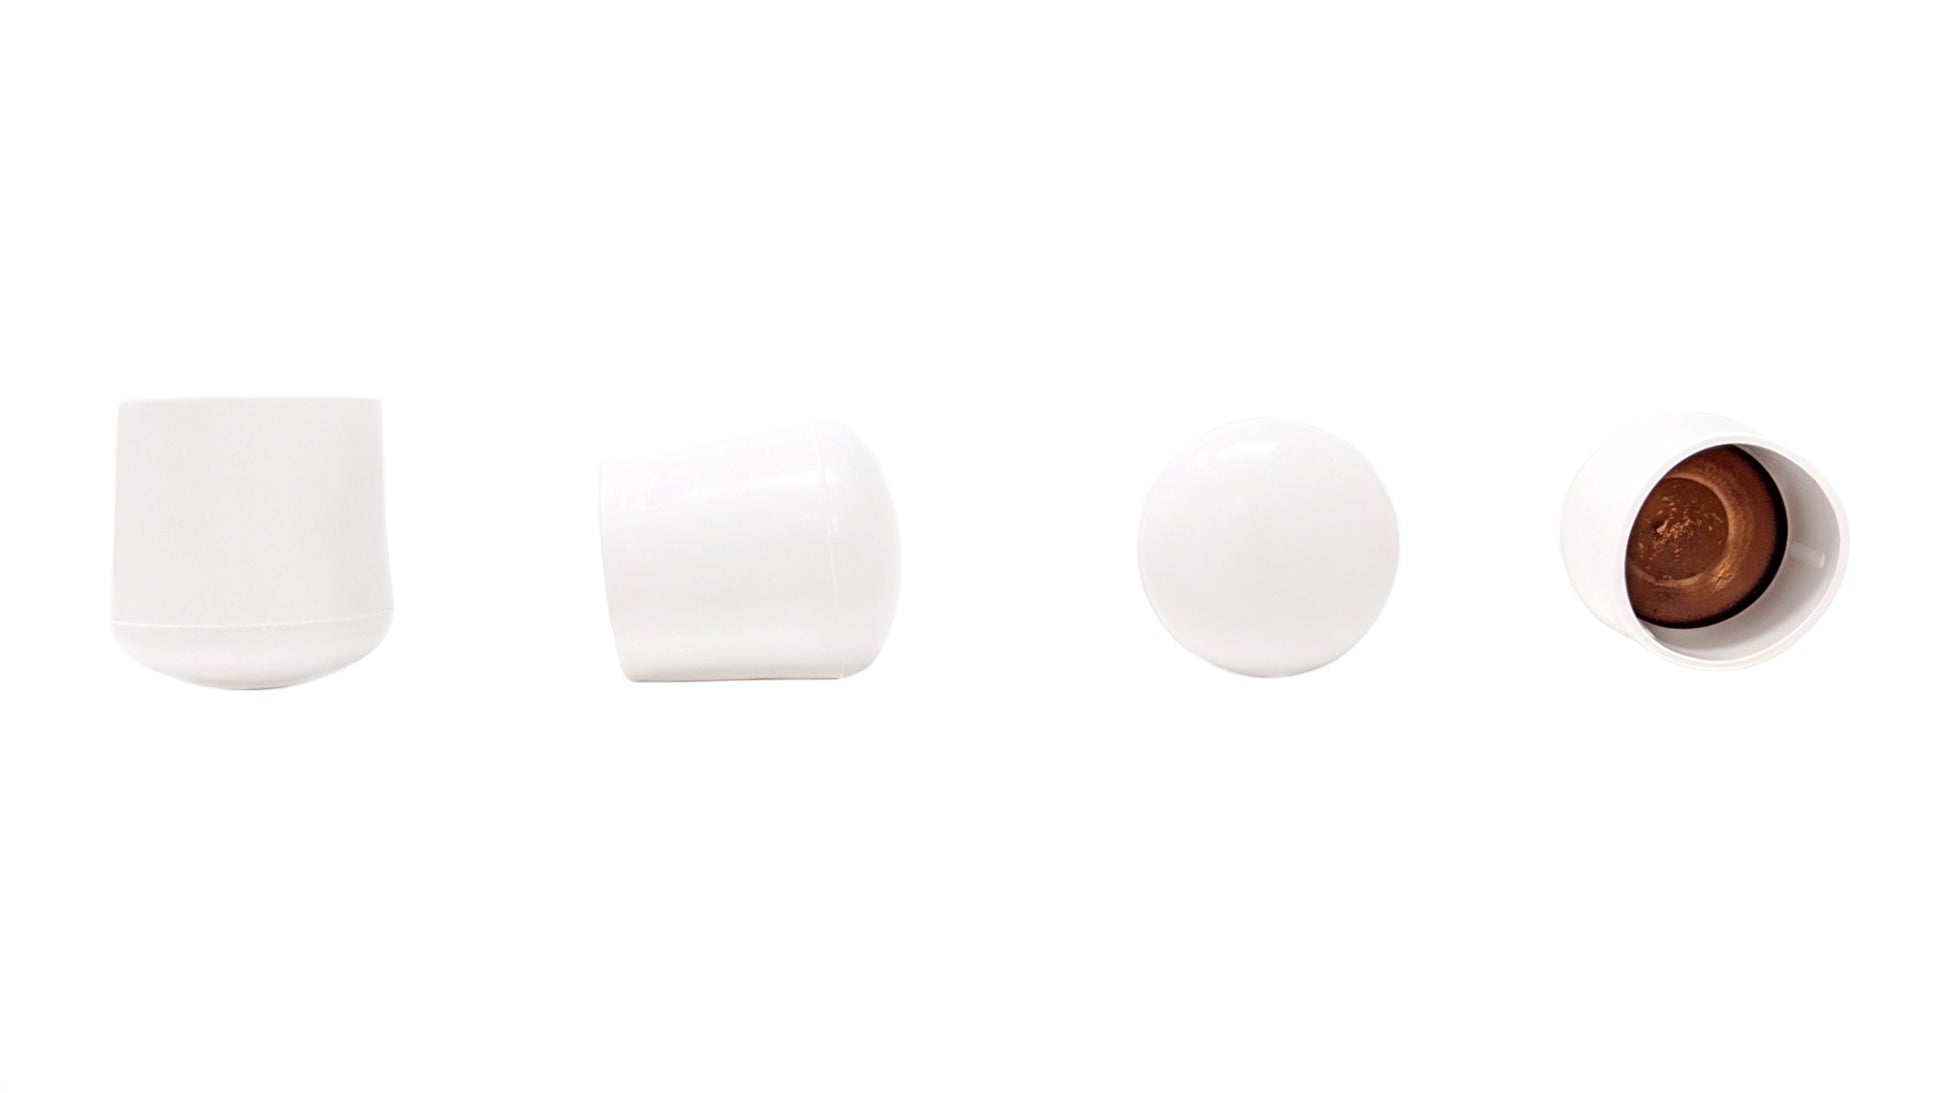 28mm White Rubber Ferrules with Steel Base Insert - Made in Germany - Keay Vital Parts